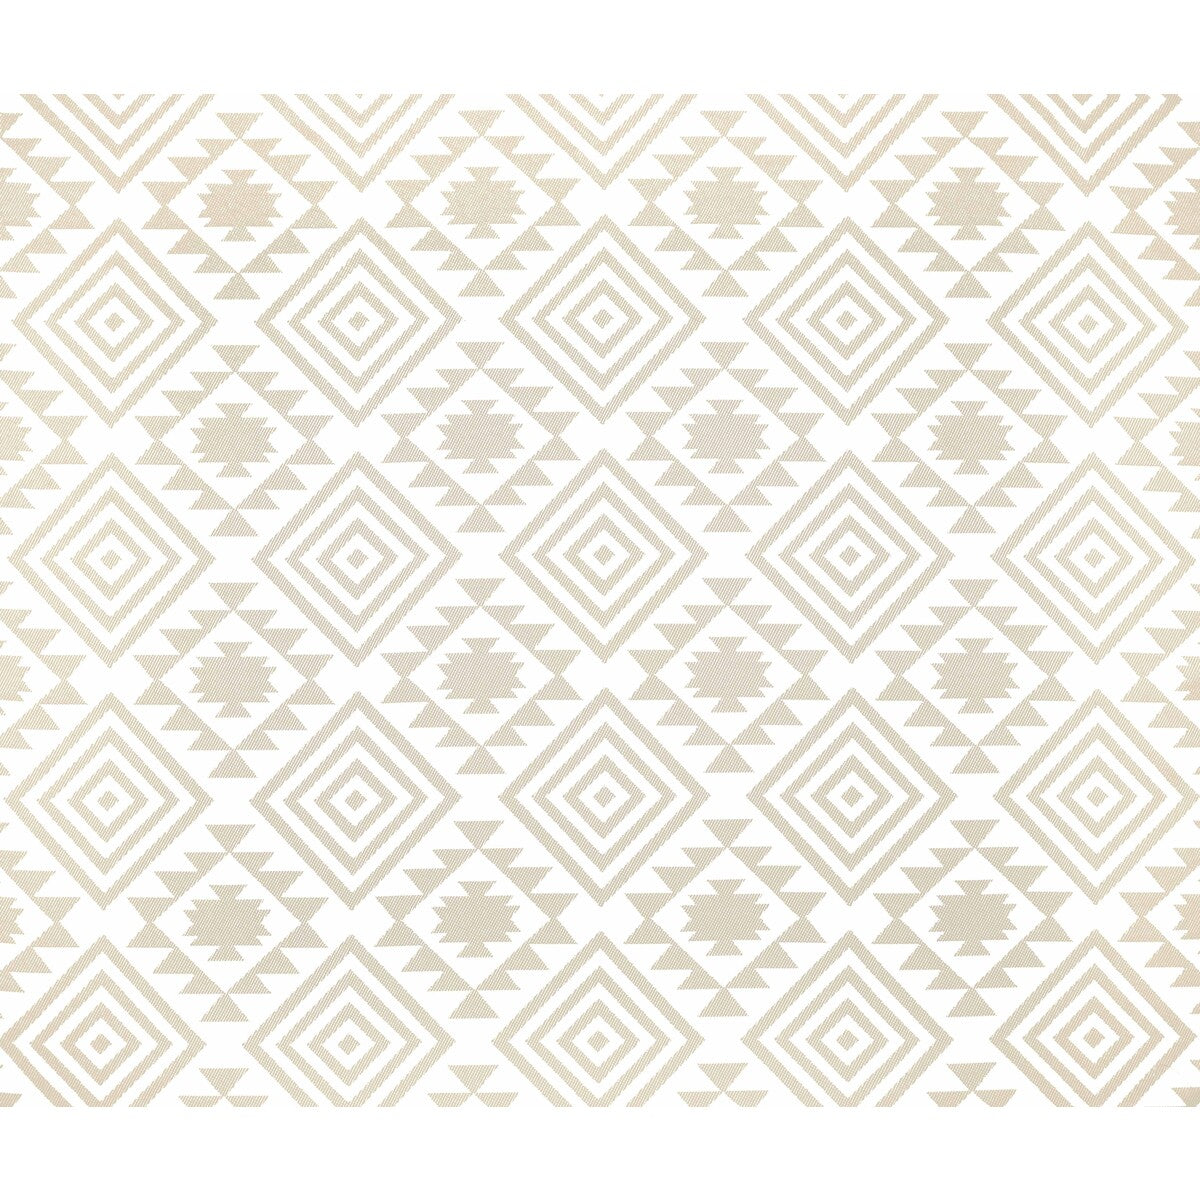 Ava fabric in beige color - pattern GDT5383.7.0 - by Gaston y Daniela in the Gaston Africalia collection